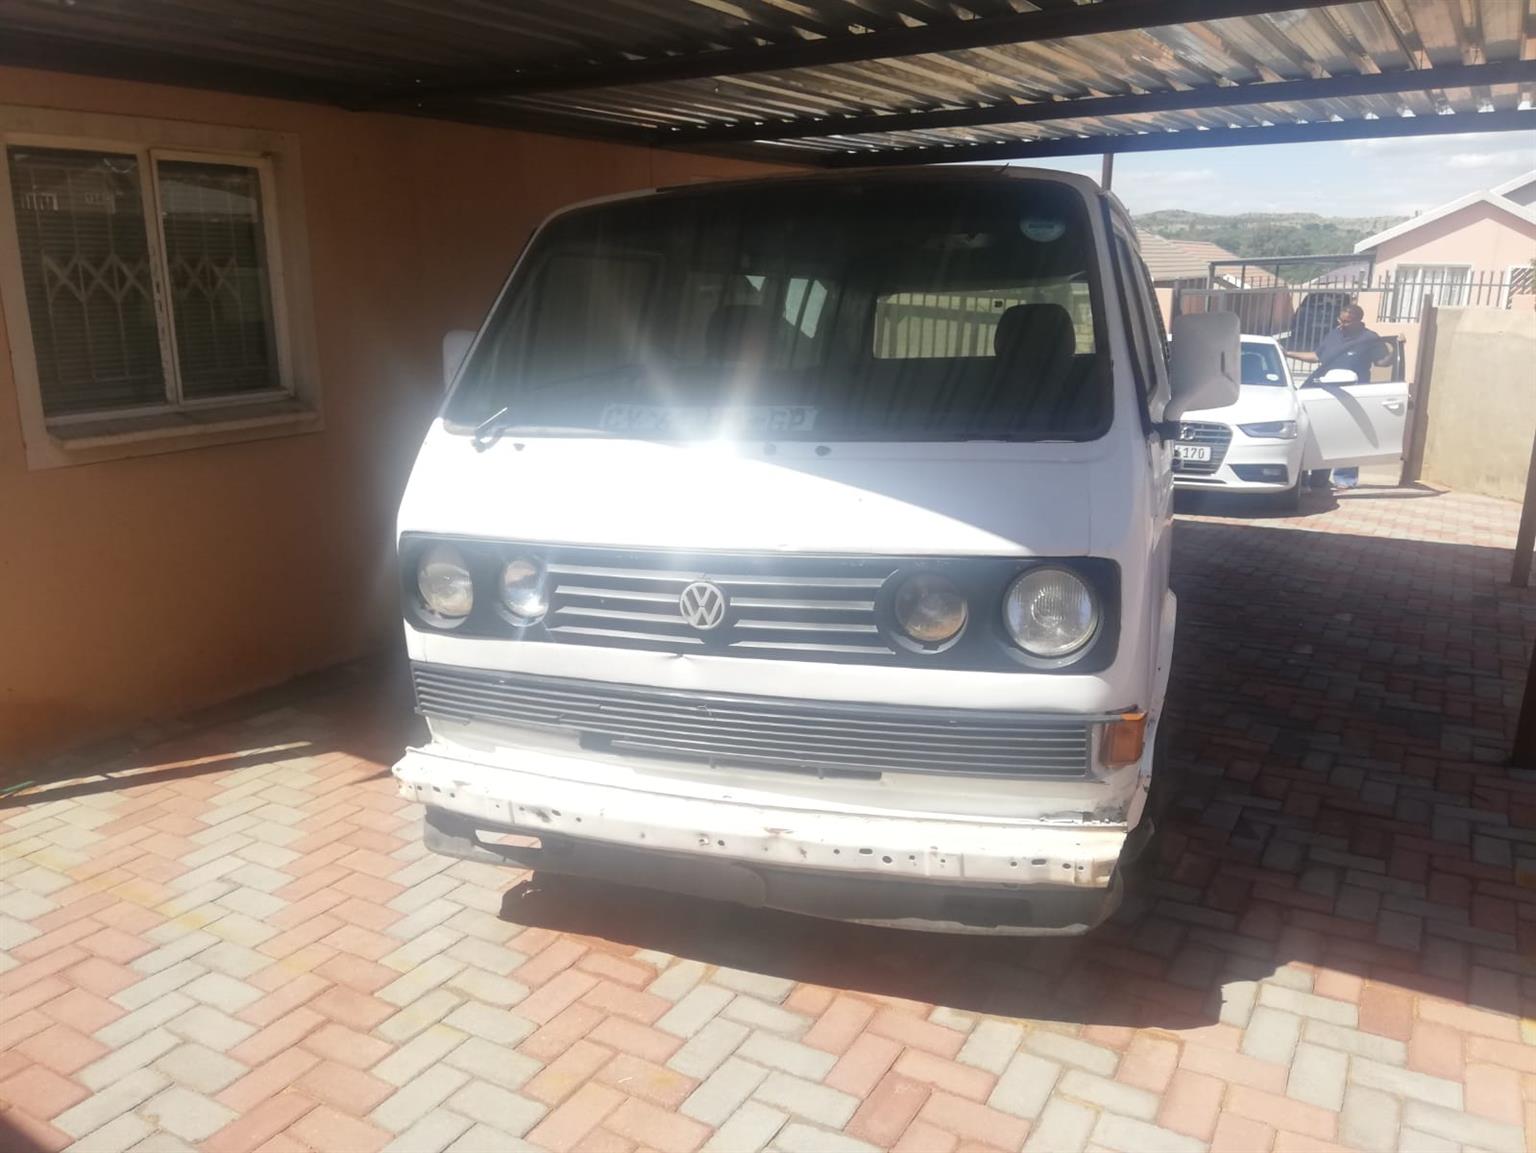 Microbus for sale, 1996 model, white, good condition 